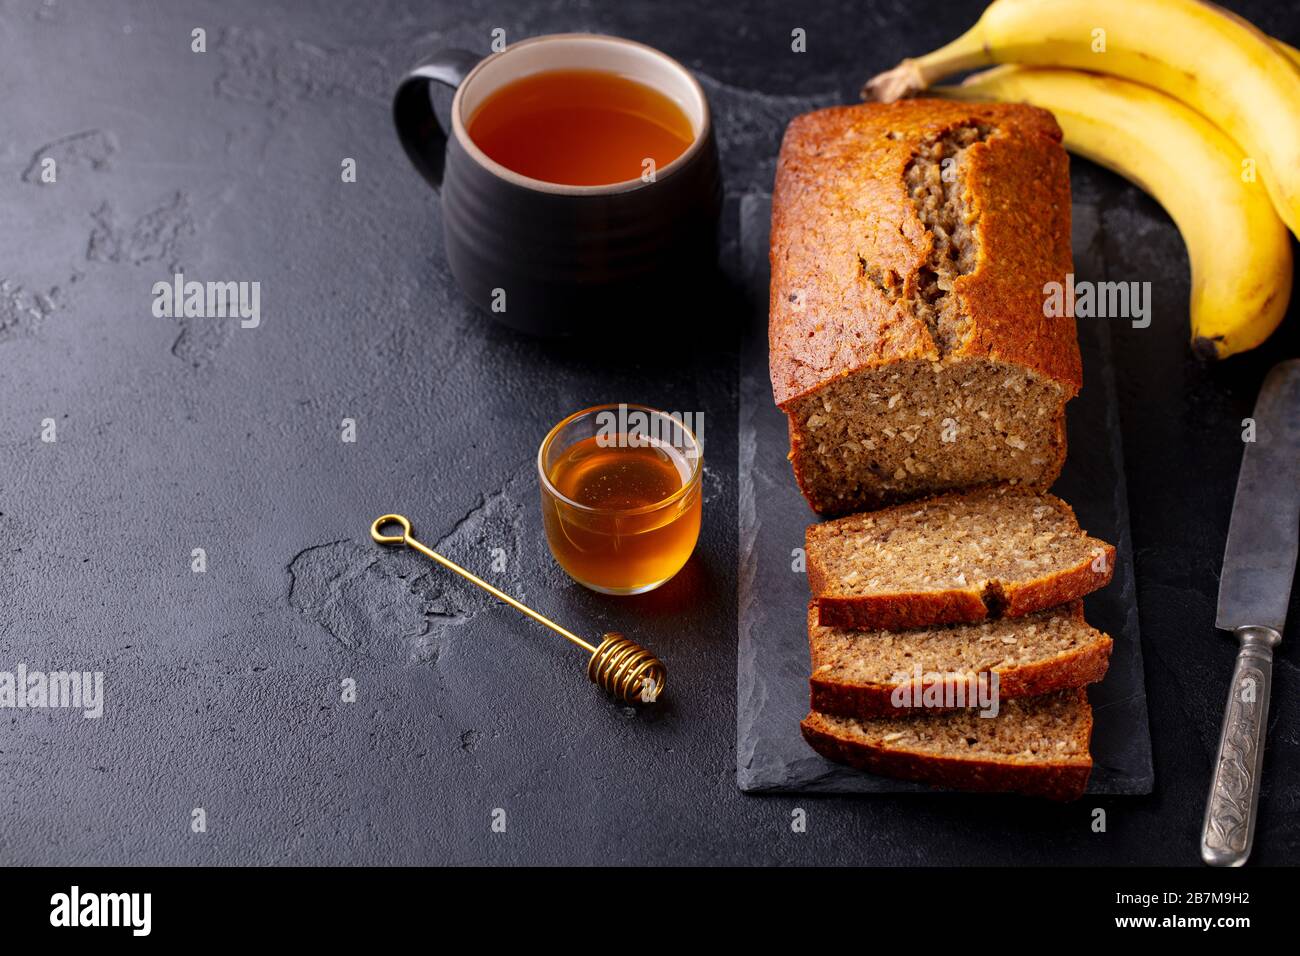 Healthy vegan oat and banana loaf bread, cake. Dark background. Copy space. Stock Photo